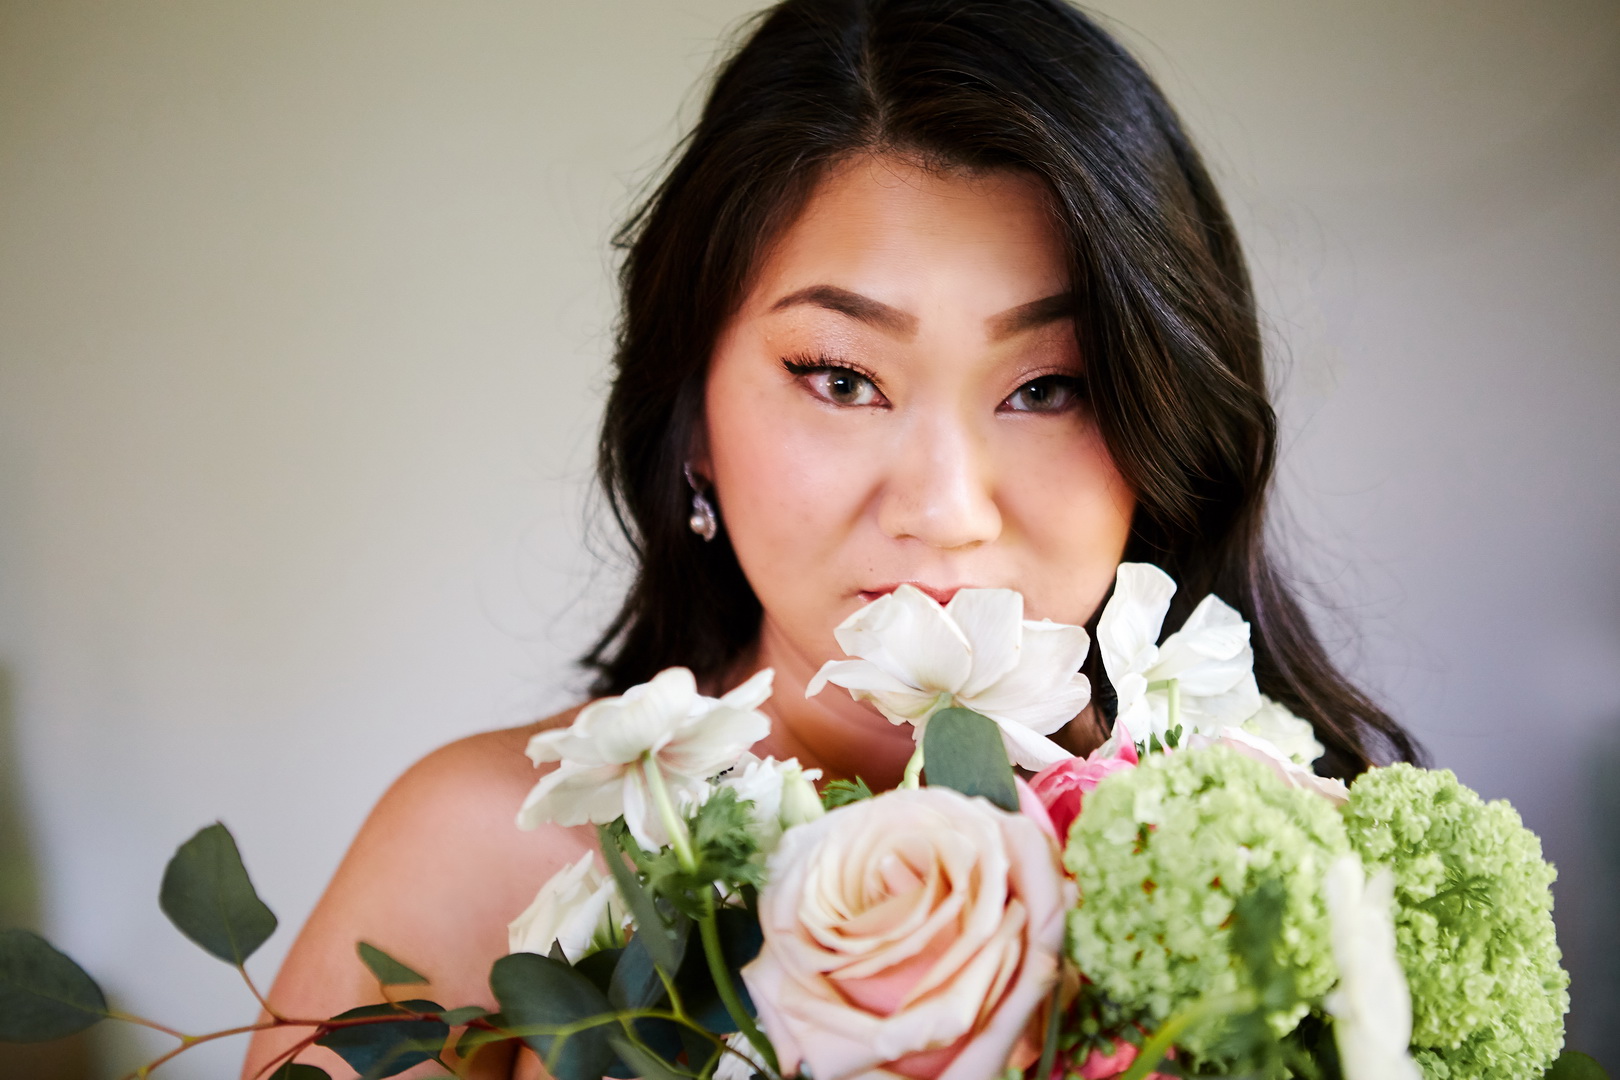 Close up portrait of the bride with bouquet of roses, peonies, and anemones.